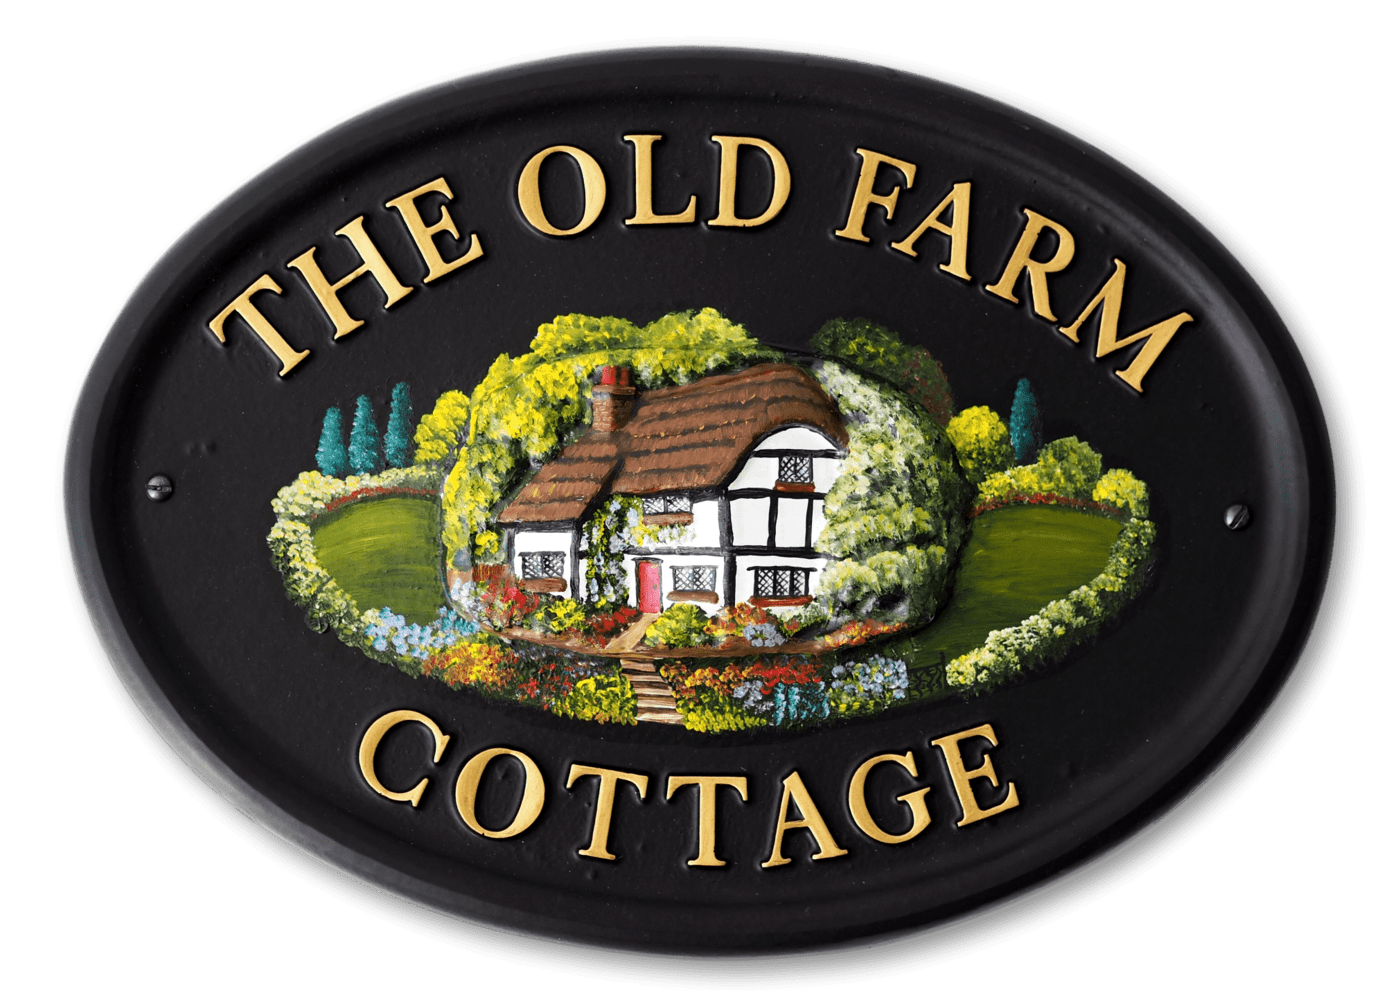 Cottage house sign